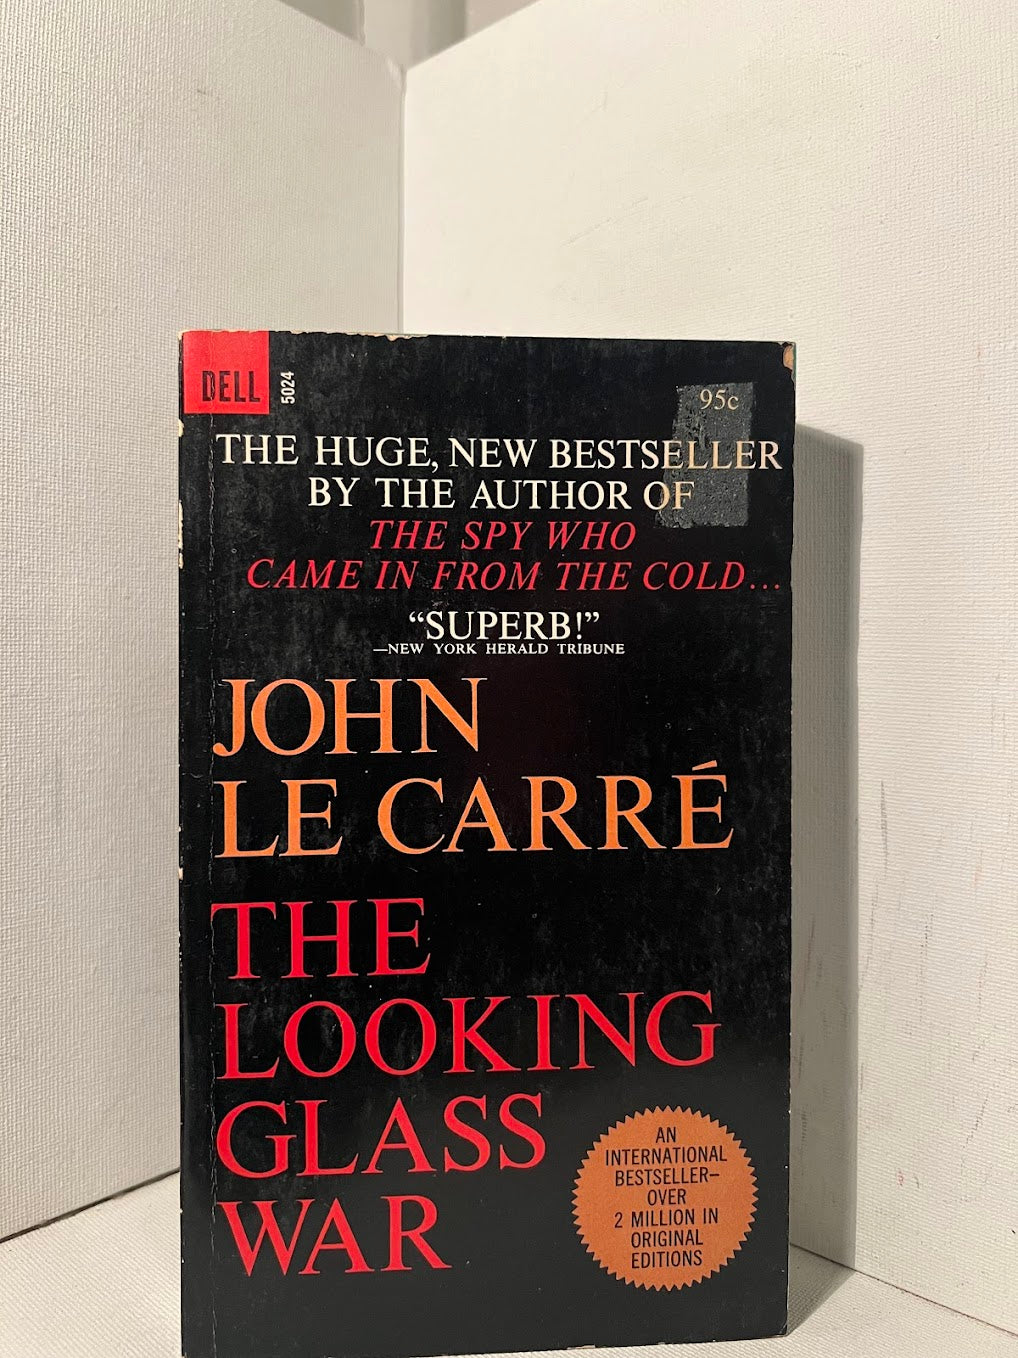 The Looking Glass War by John Le Carre